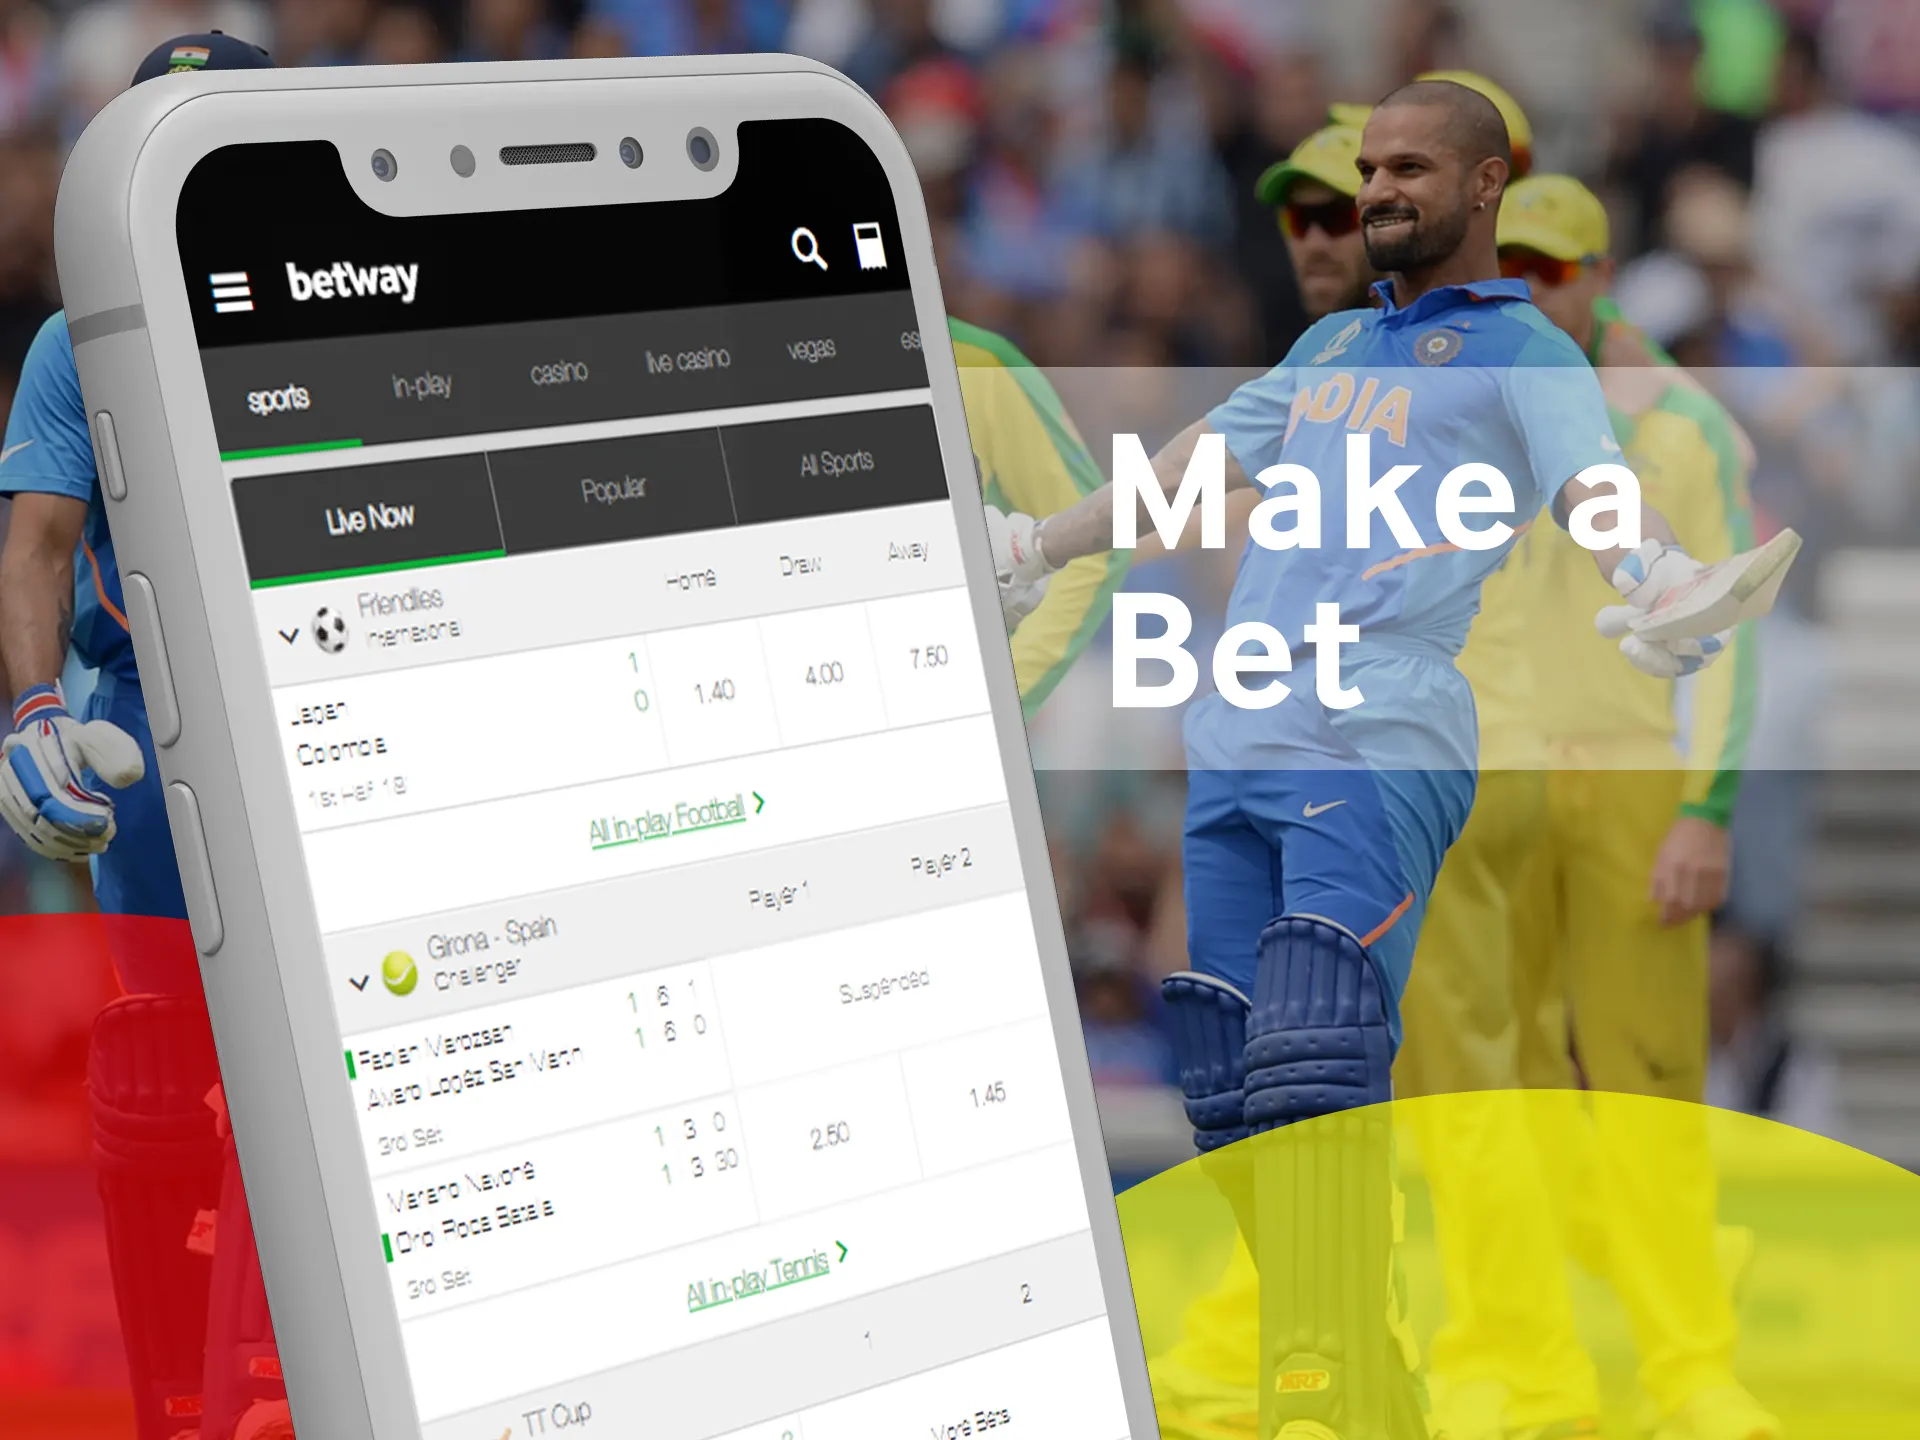 Make bet on your favourite team.